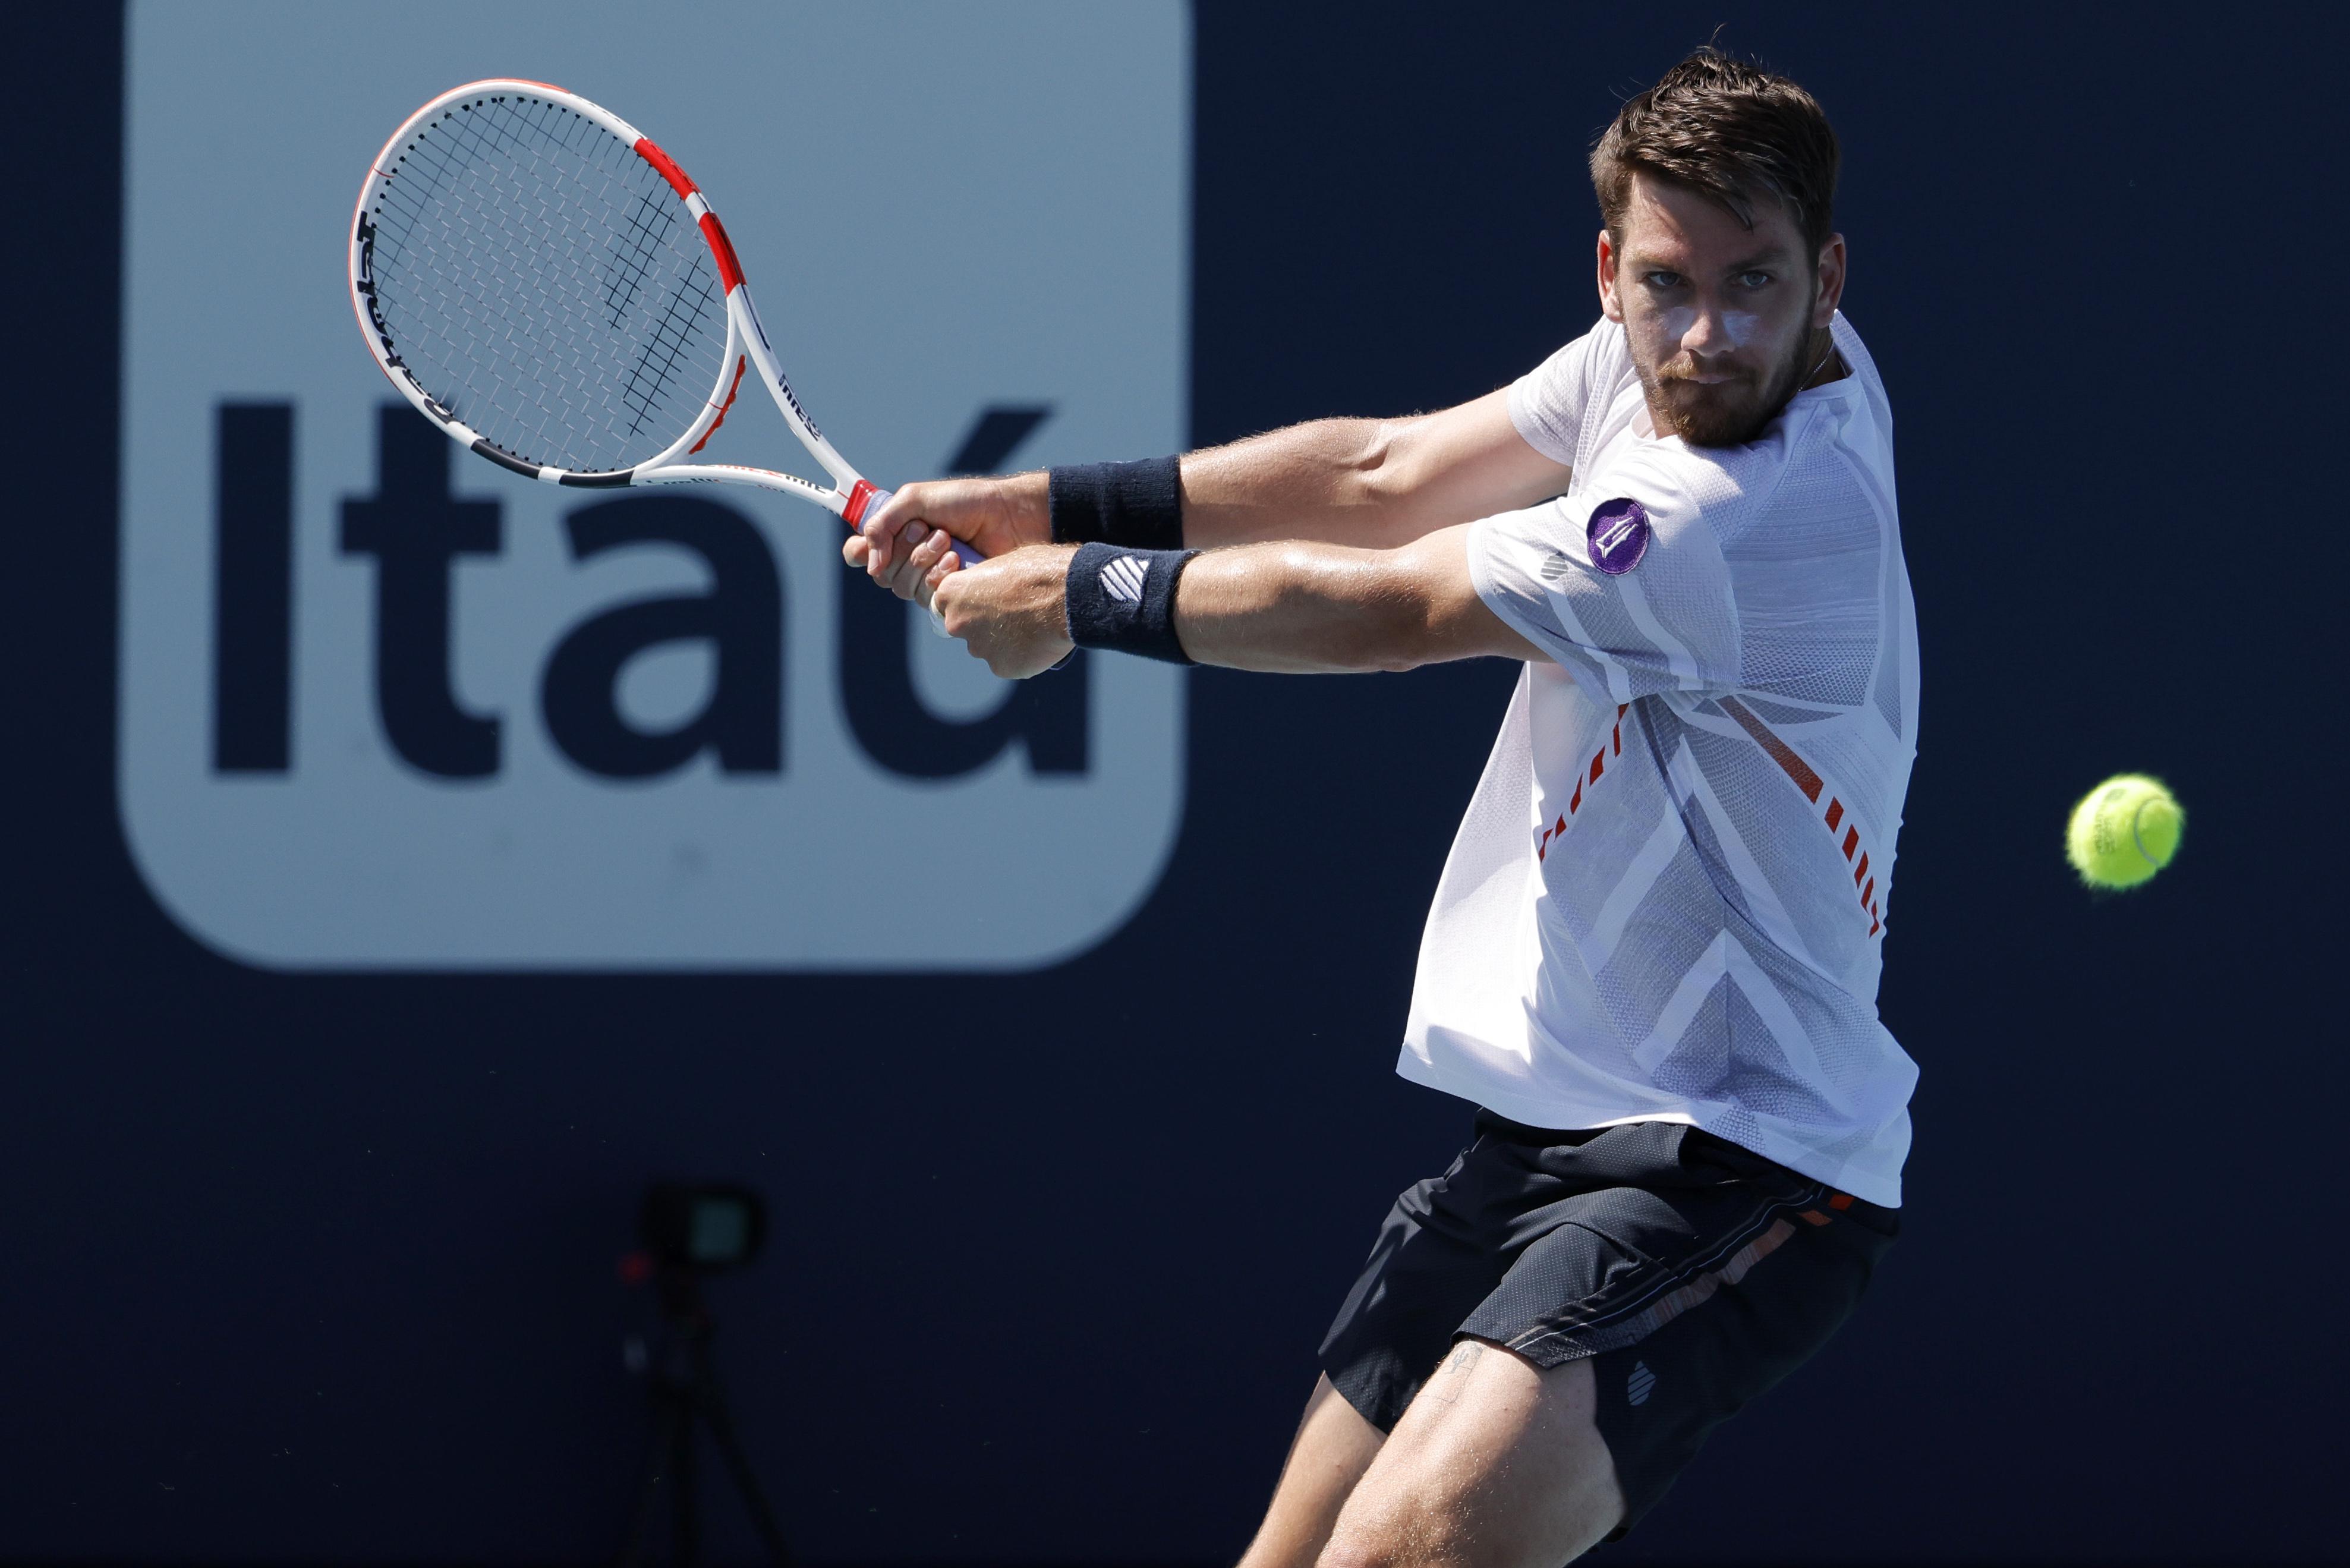 Cameron Norrie vs Steve Johnson Odds, Prediction and Betting Trends for 2022 Wimbledon Men's Round 3 Match